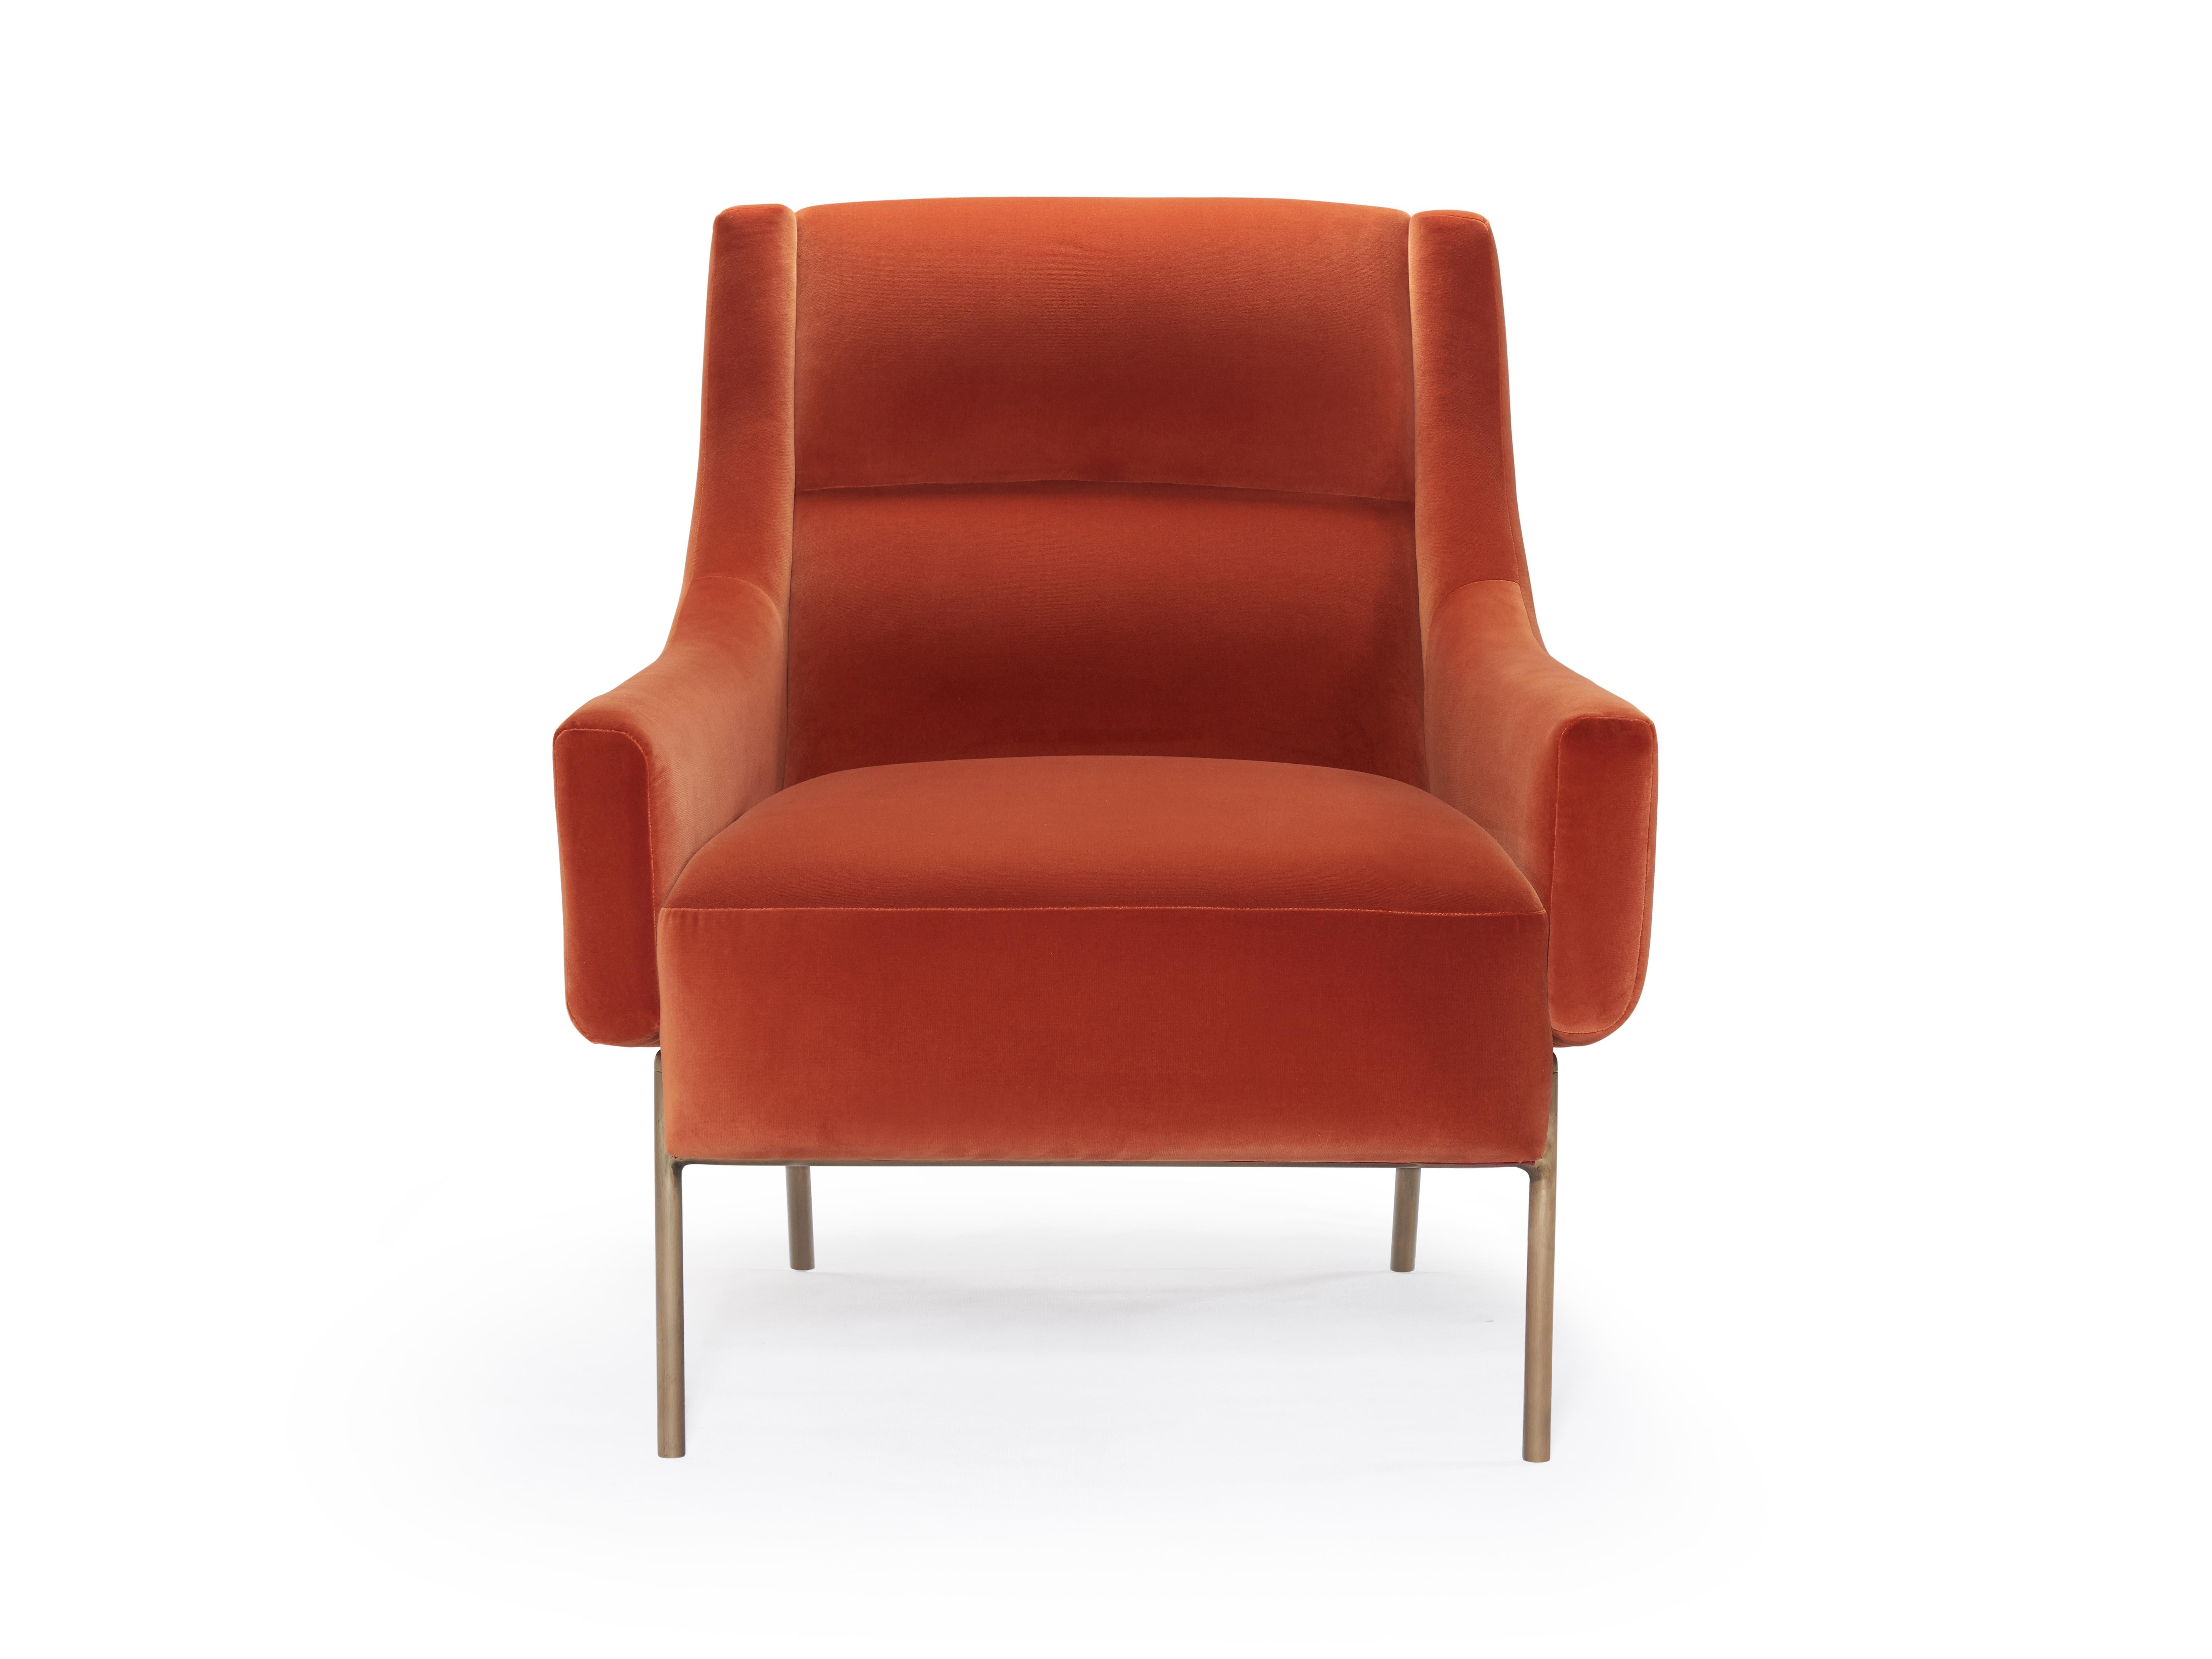 Price for lounge only.

Vista lounge chair and ottoman resonate exactly as their title suggests, a place where you can reflect, contemplate and take learned perspective. The lounge chairs hugging arms define a sensual embrace whilst held aloof by